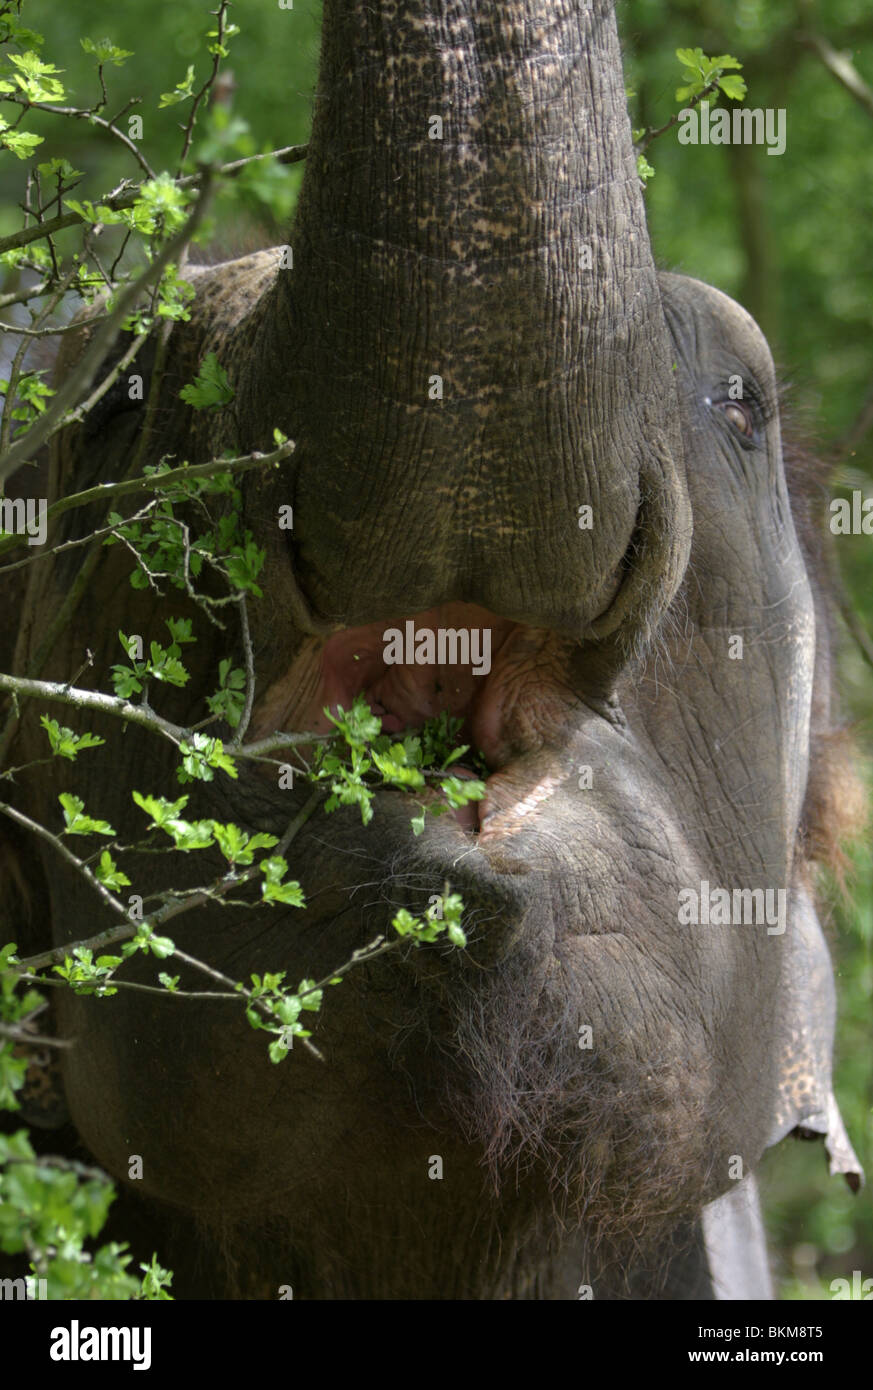 A close up of an Indian elephant. Stock Photo